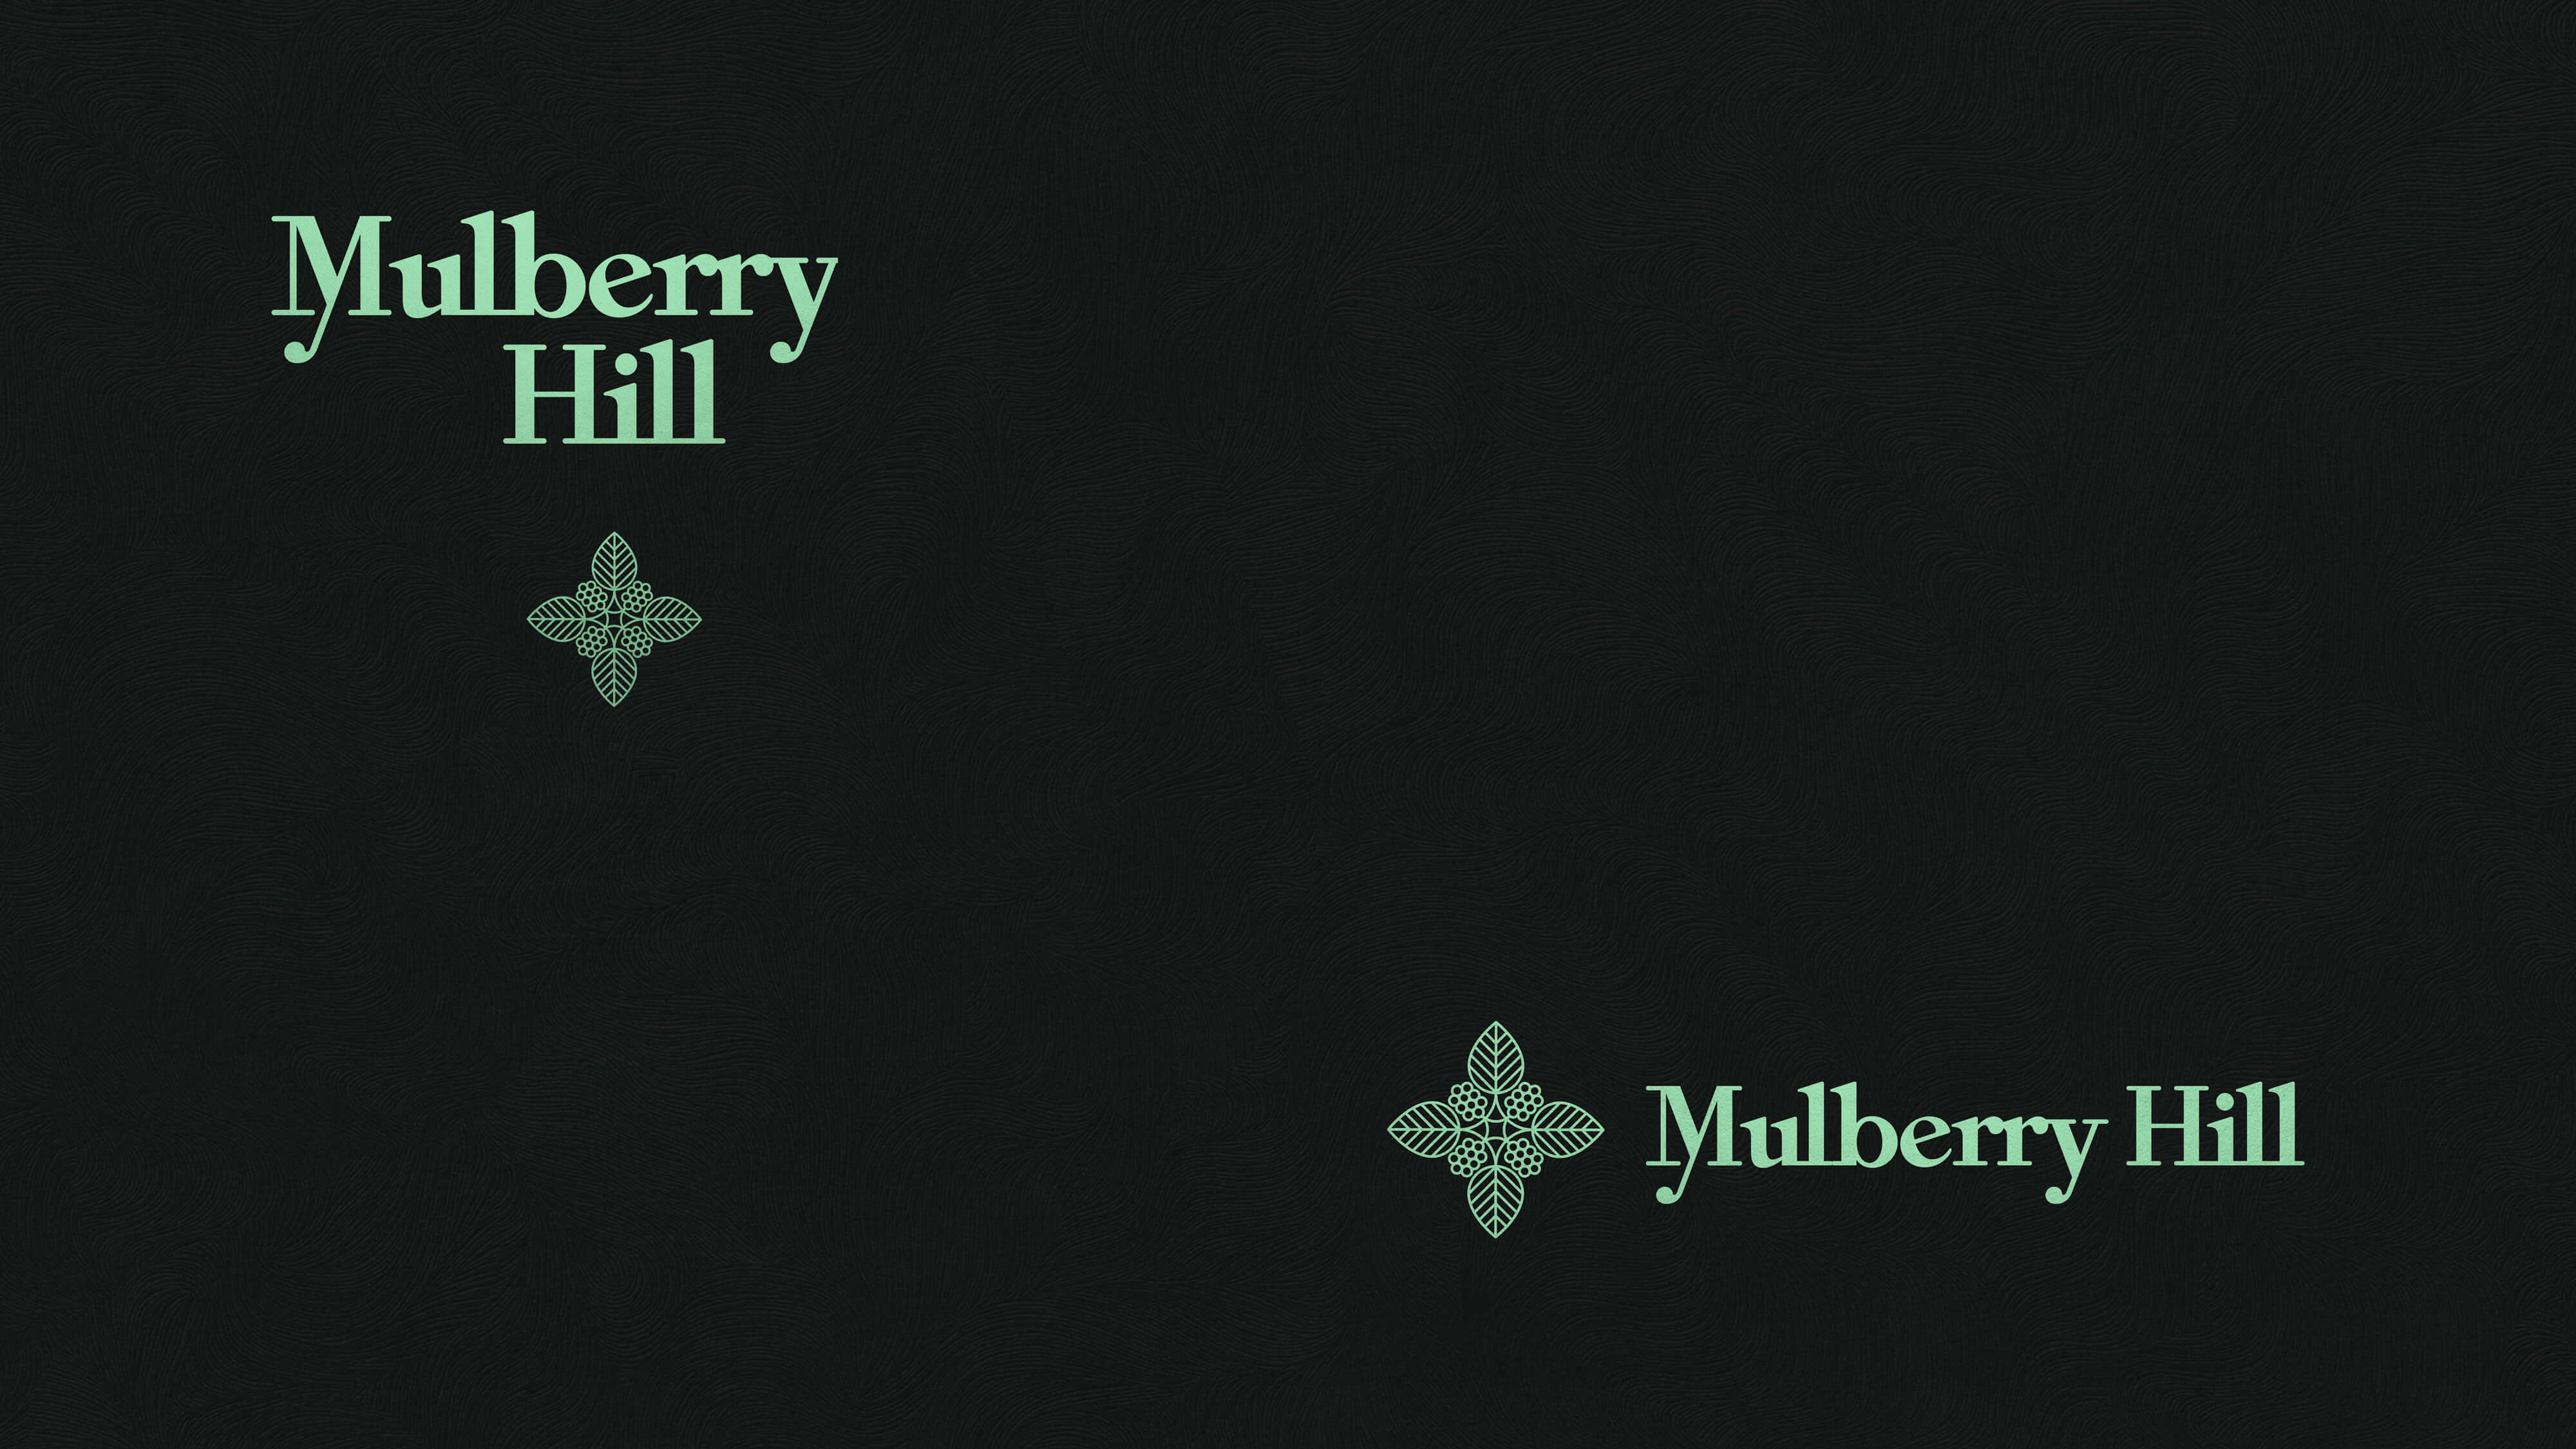 Mulberry Hill